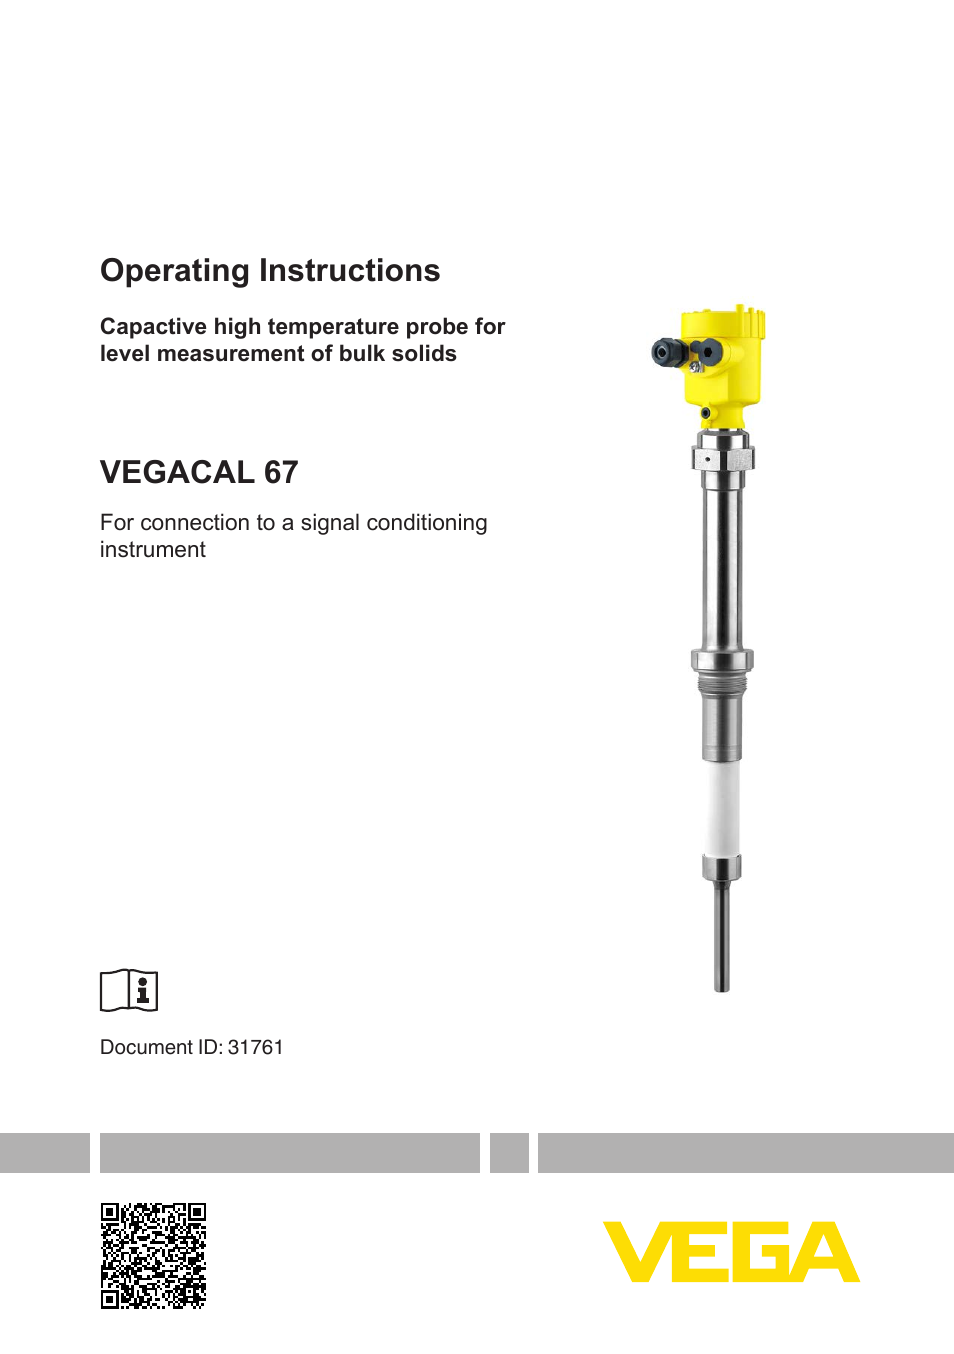 VEGACAL 67 For connection to a signal conditioning instrument